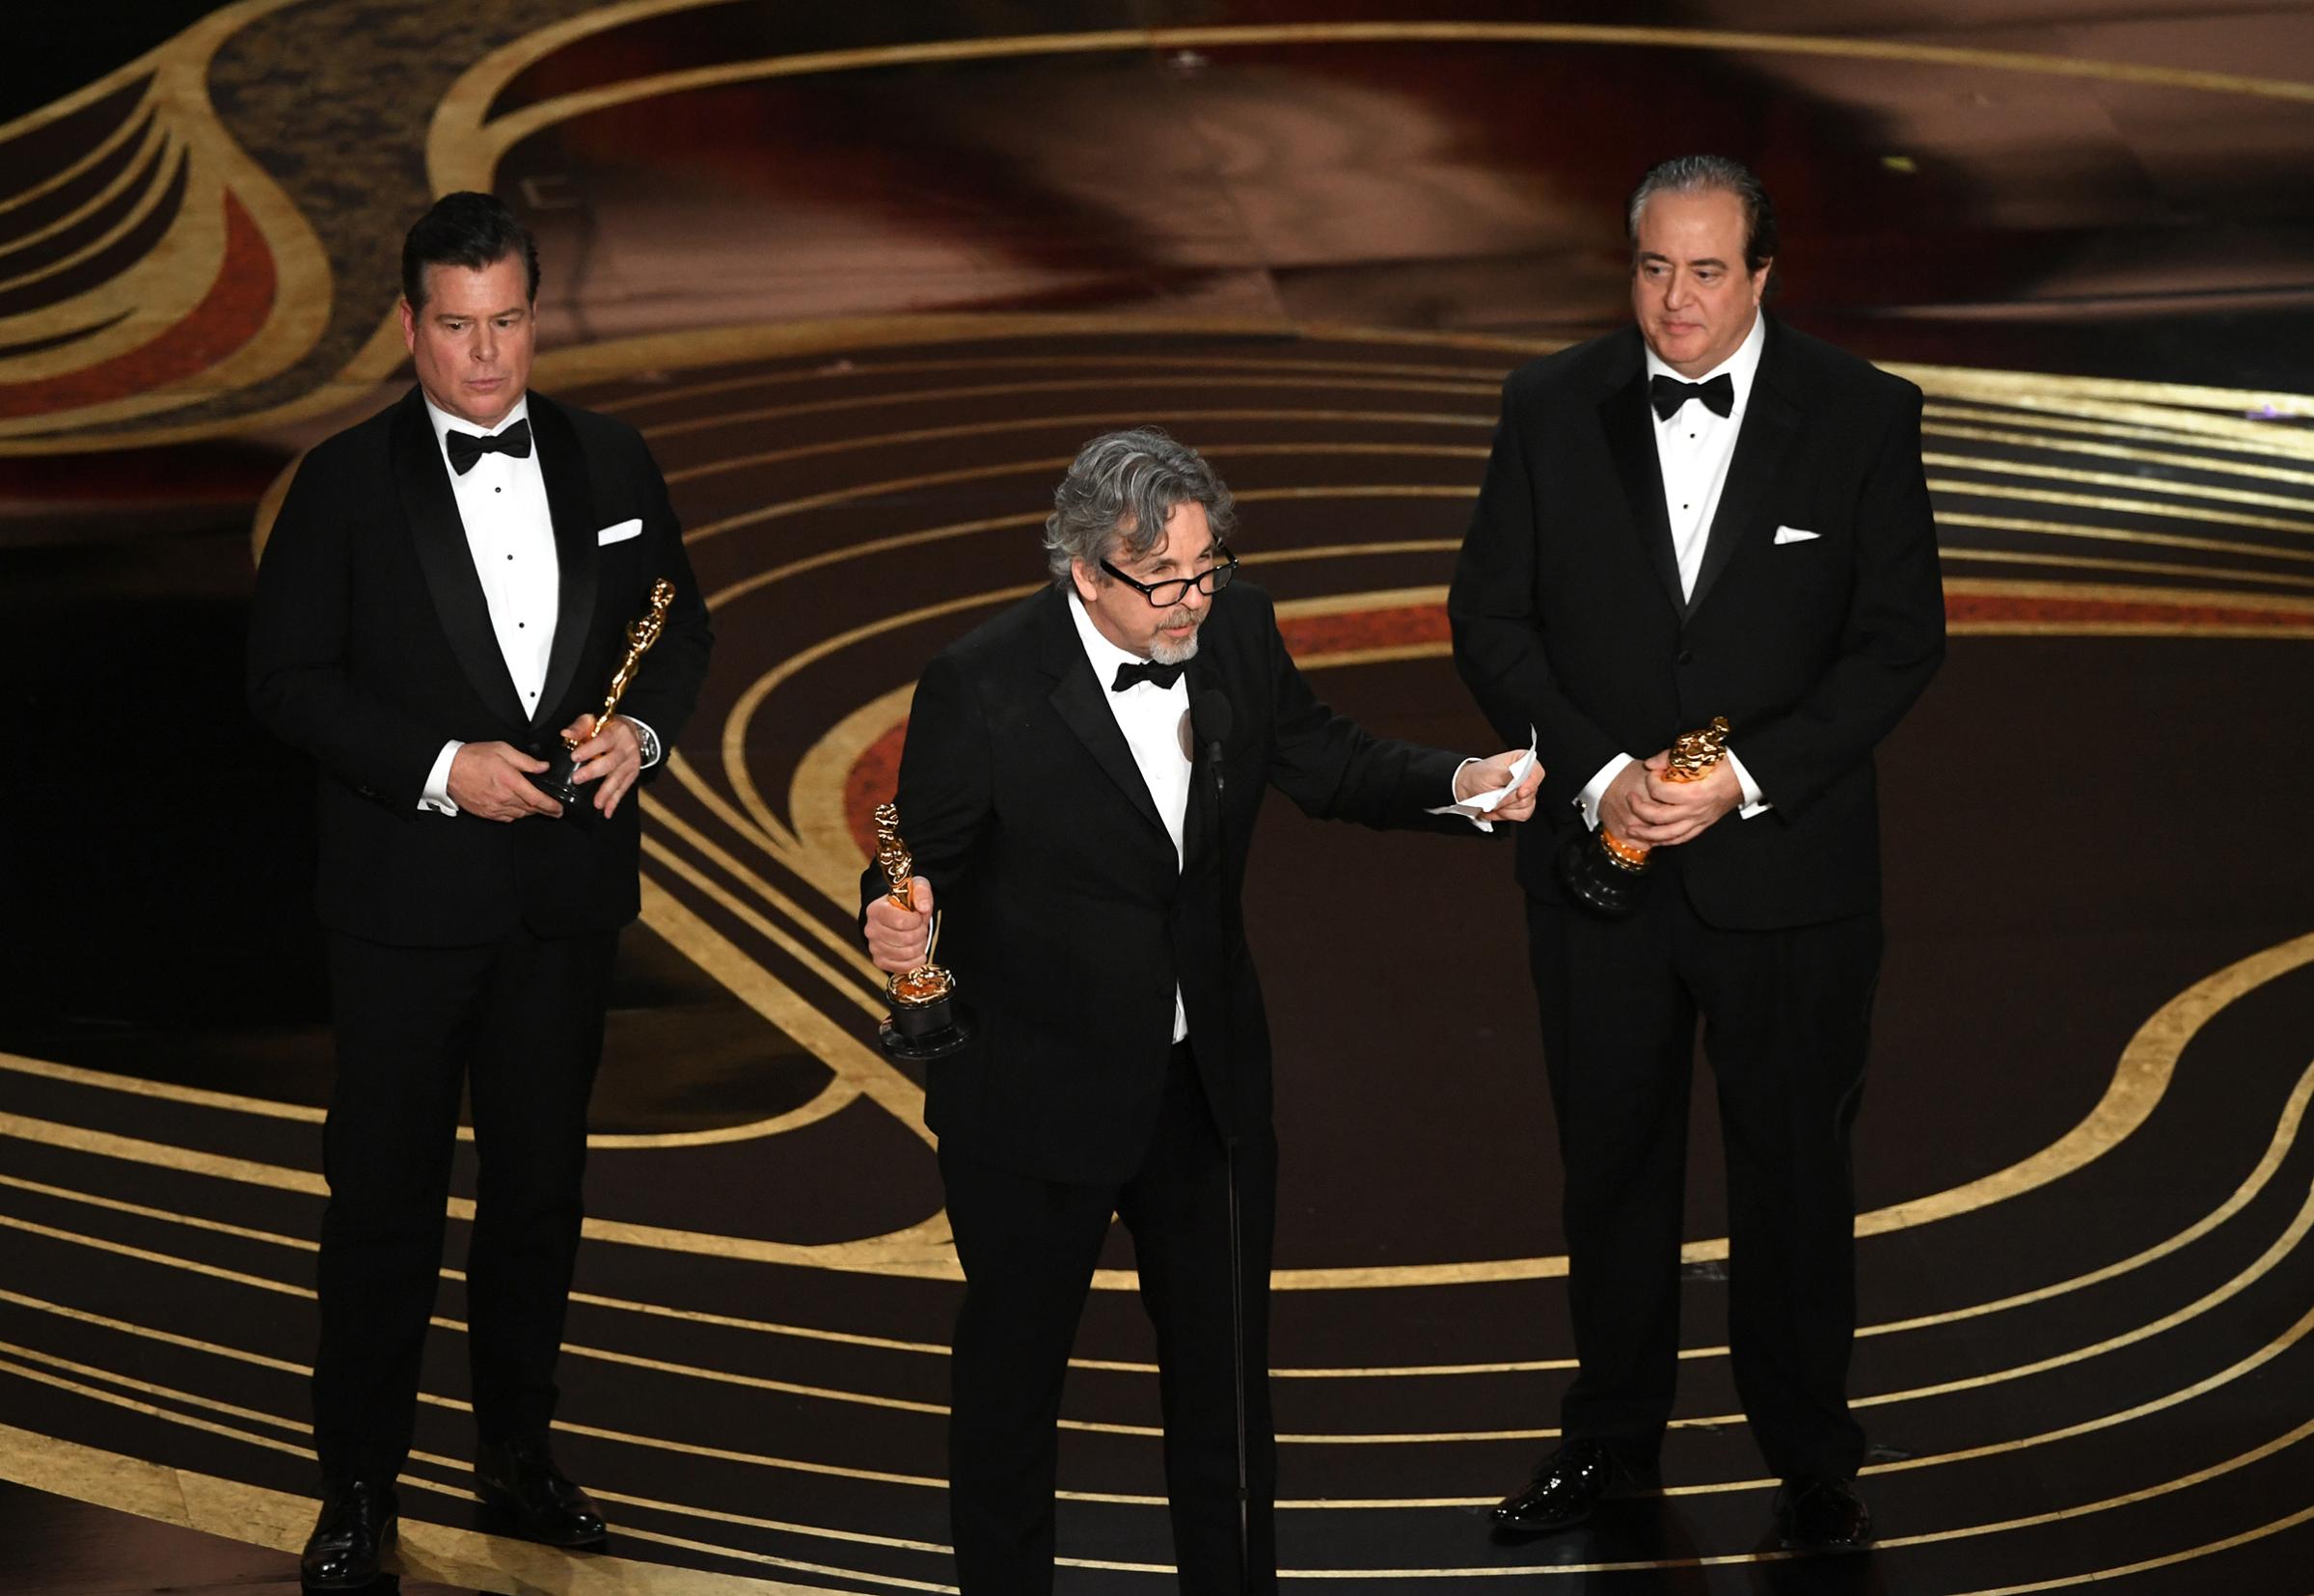 Brian Currie, Peter Farrelly, and Nick Vallelonga accept the Original Screenplay award for 'Green Book' onstage during the 91st Annual Academy Awards at Dolby Theatre on Feb. 24, 2019.